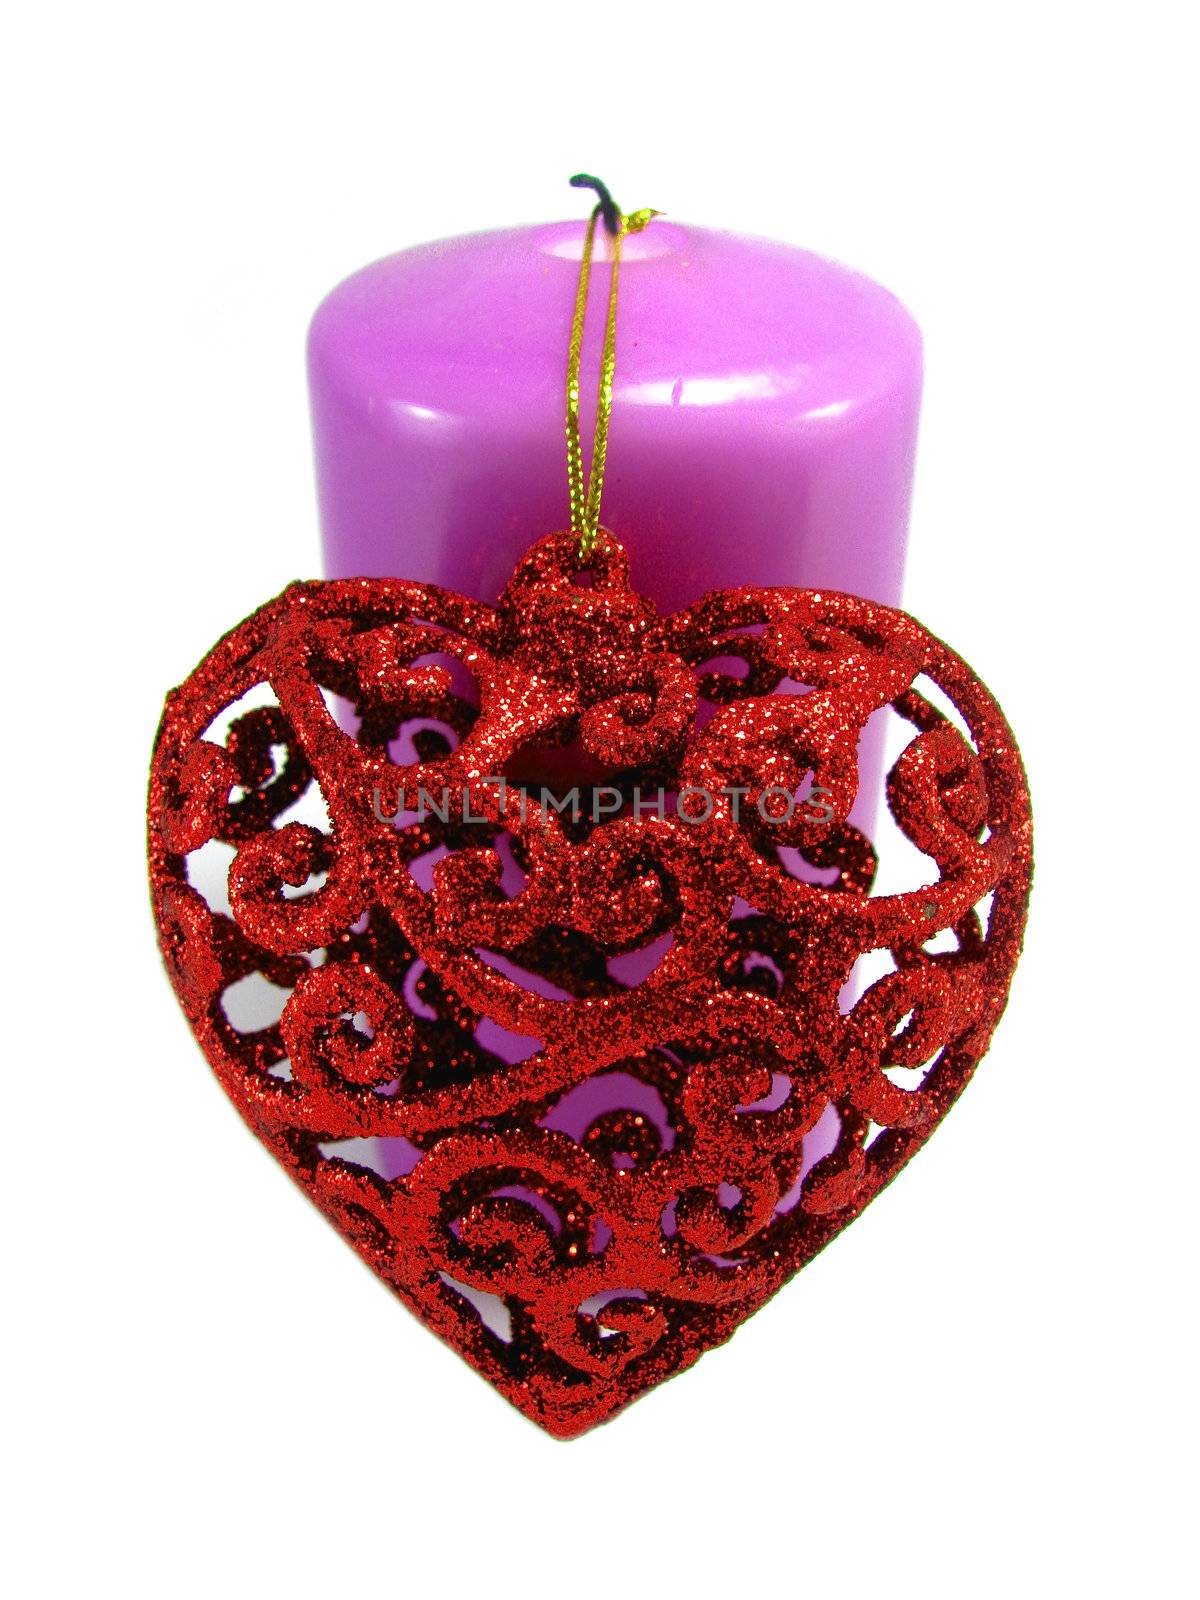 Violet candle with a red heart with a filigree attached to the Valentine's Day